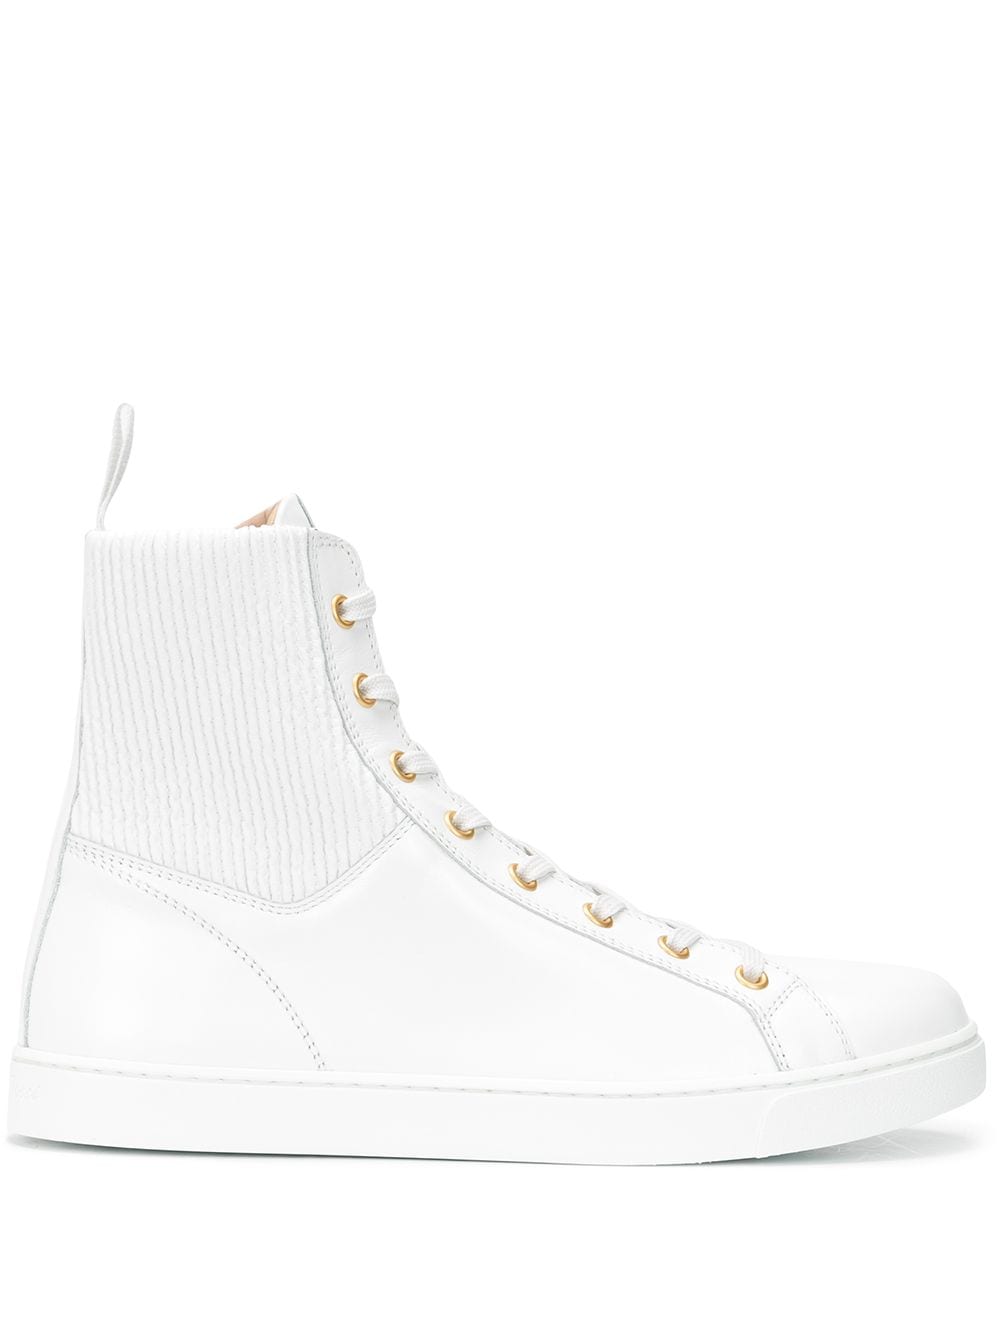 GIANVITO ROSSI HIGH TOP LACE-UP SNEAKERS